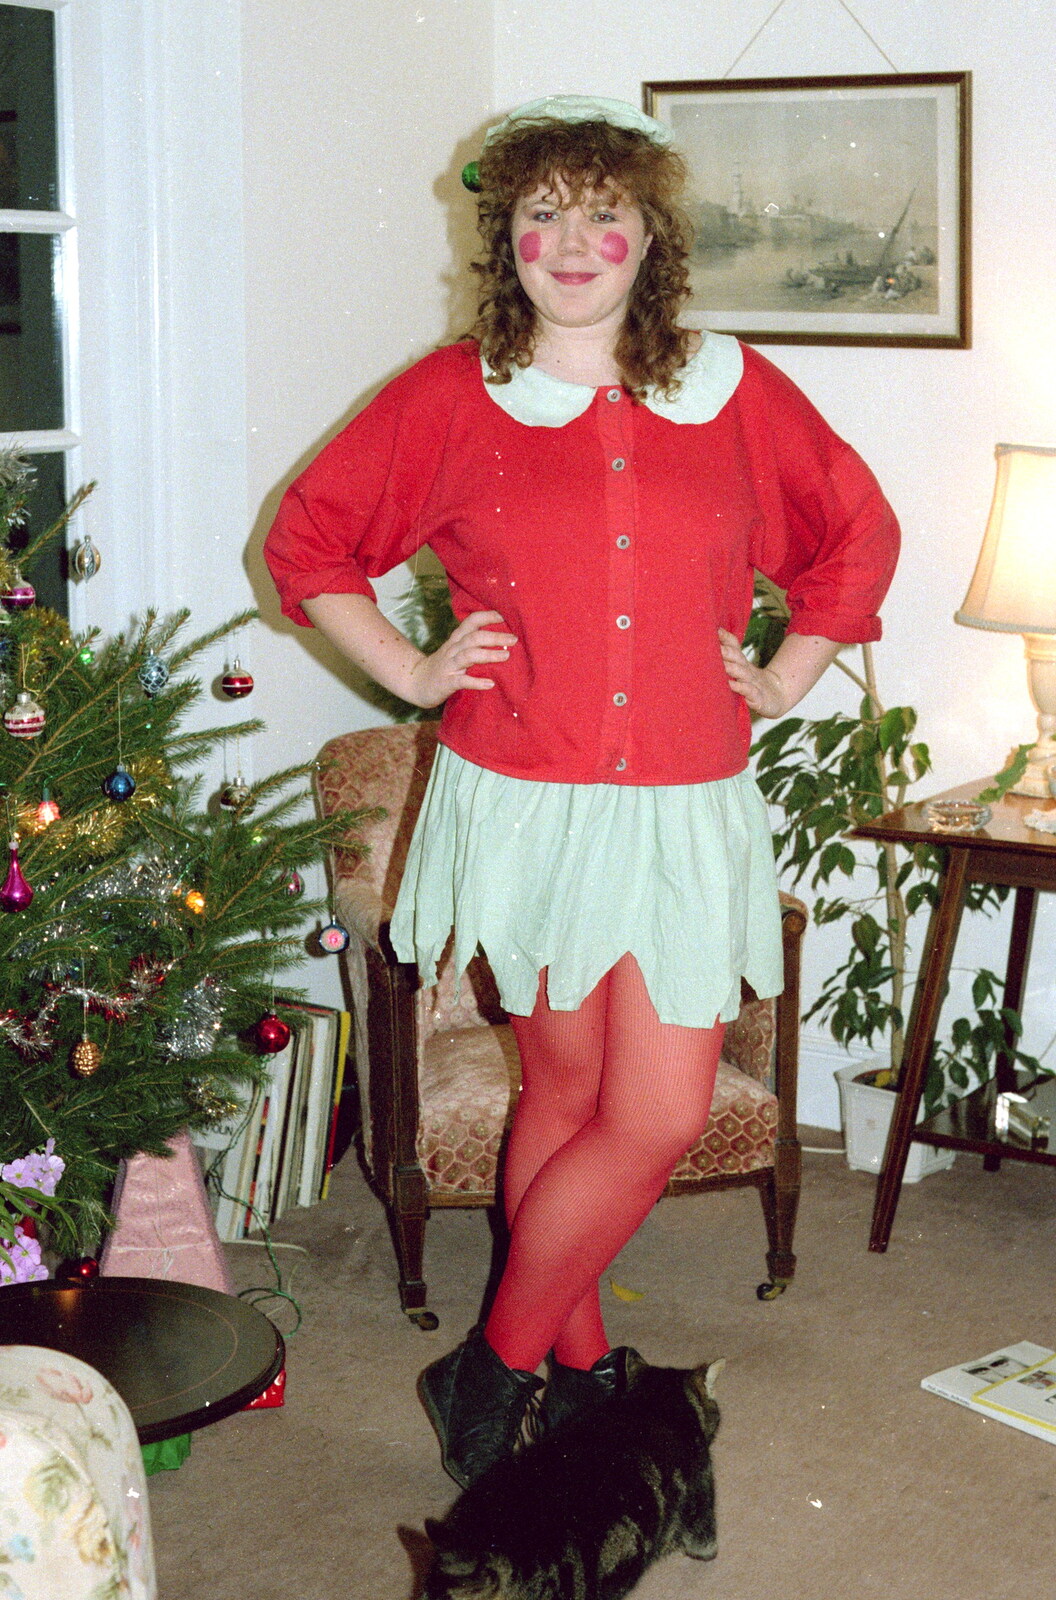 Sis dresses up as a Christmas elf from Brockenhurst College Presentation and Christmas, Hampshire - 19th December 1985